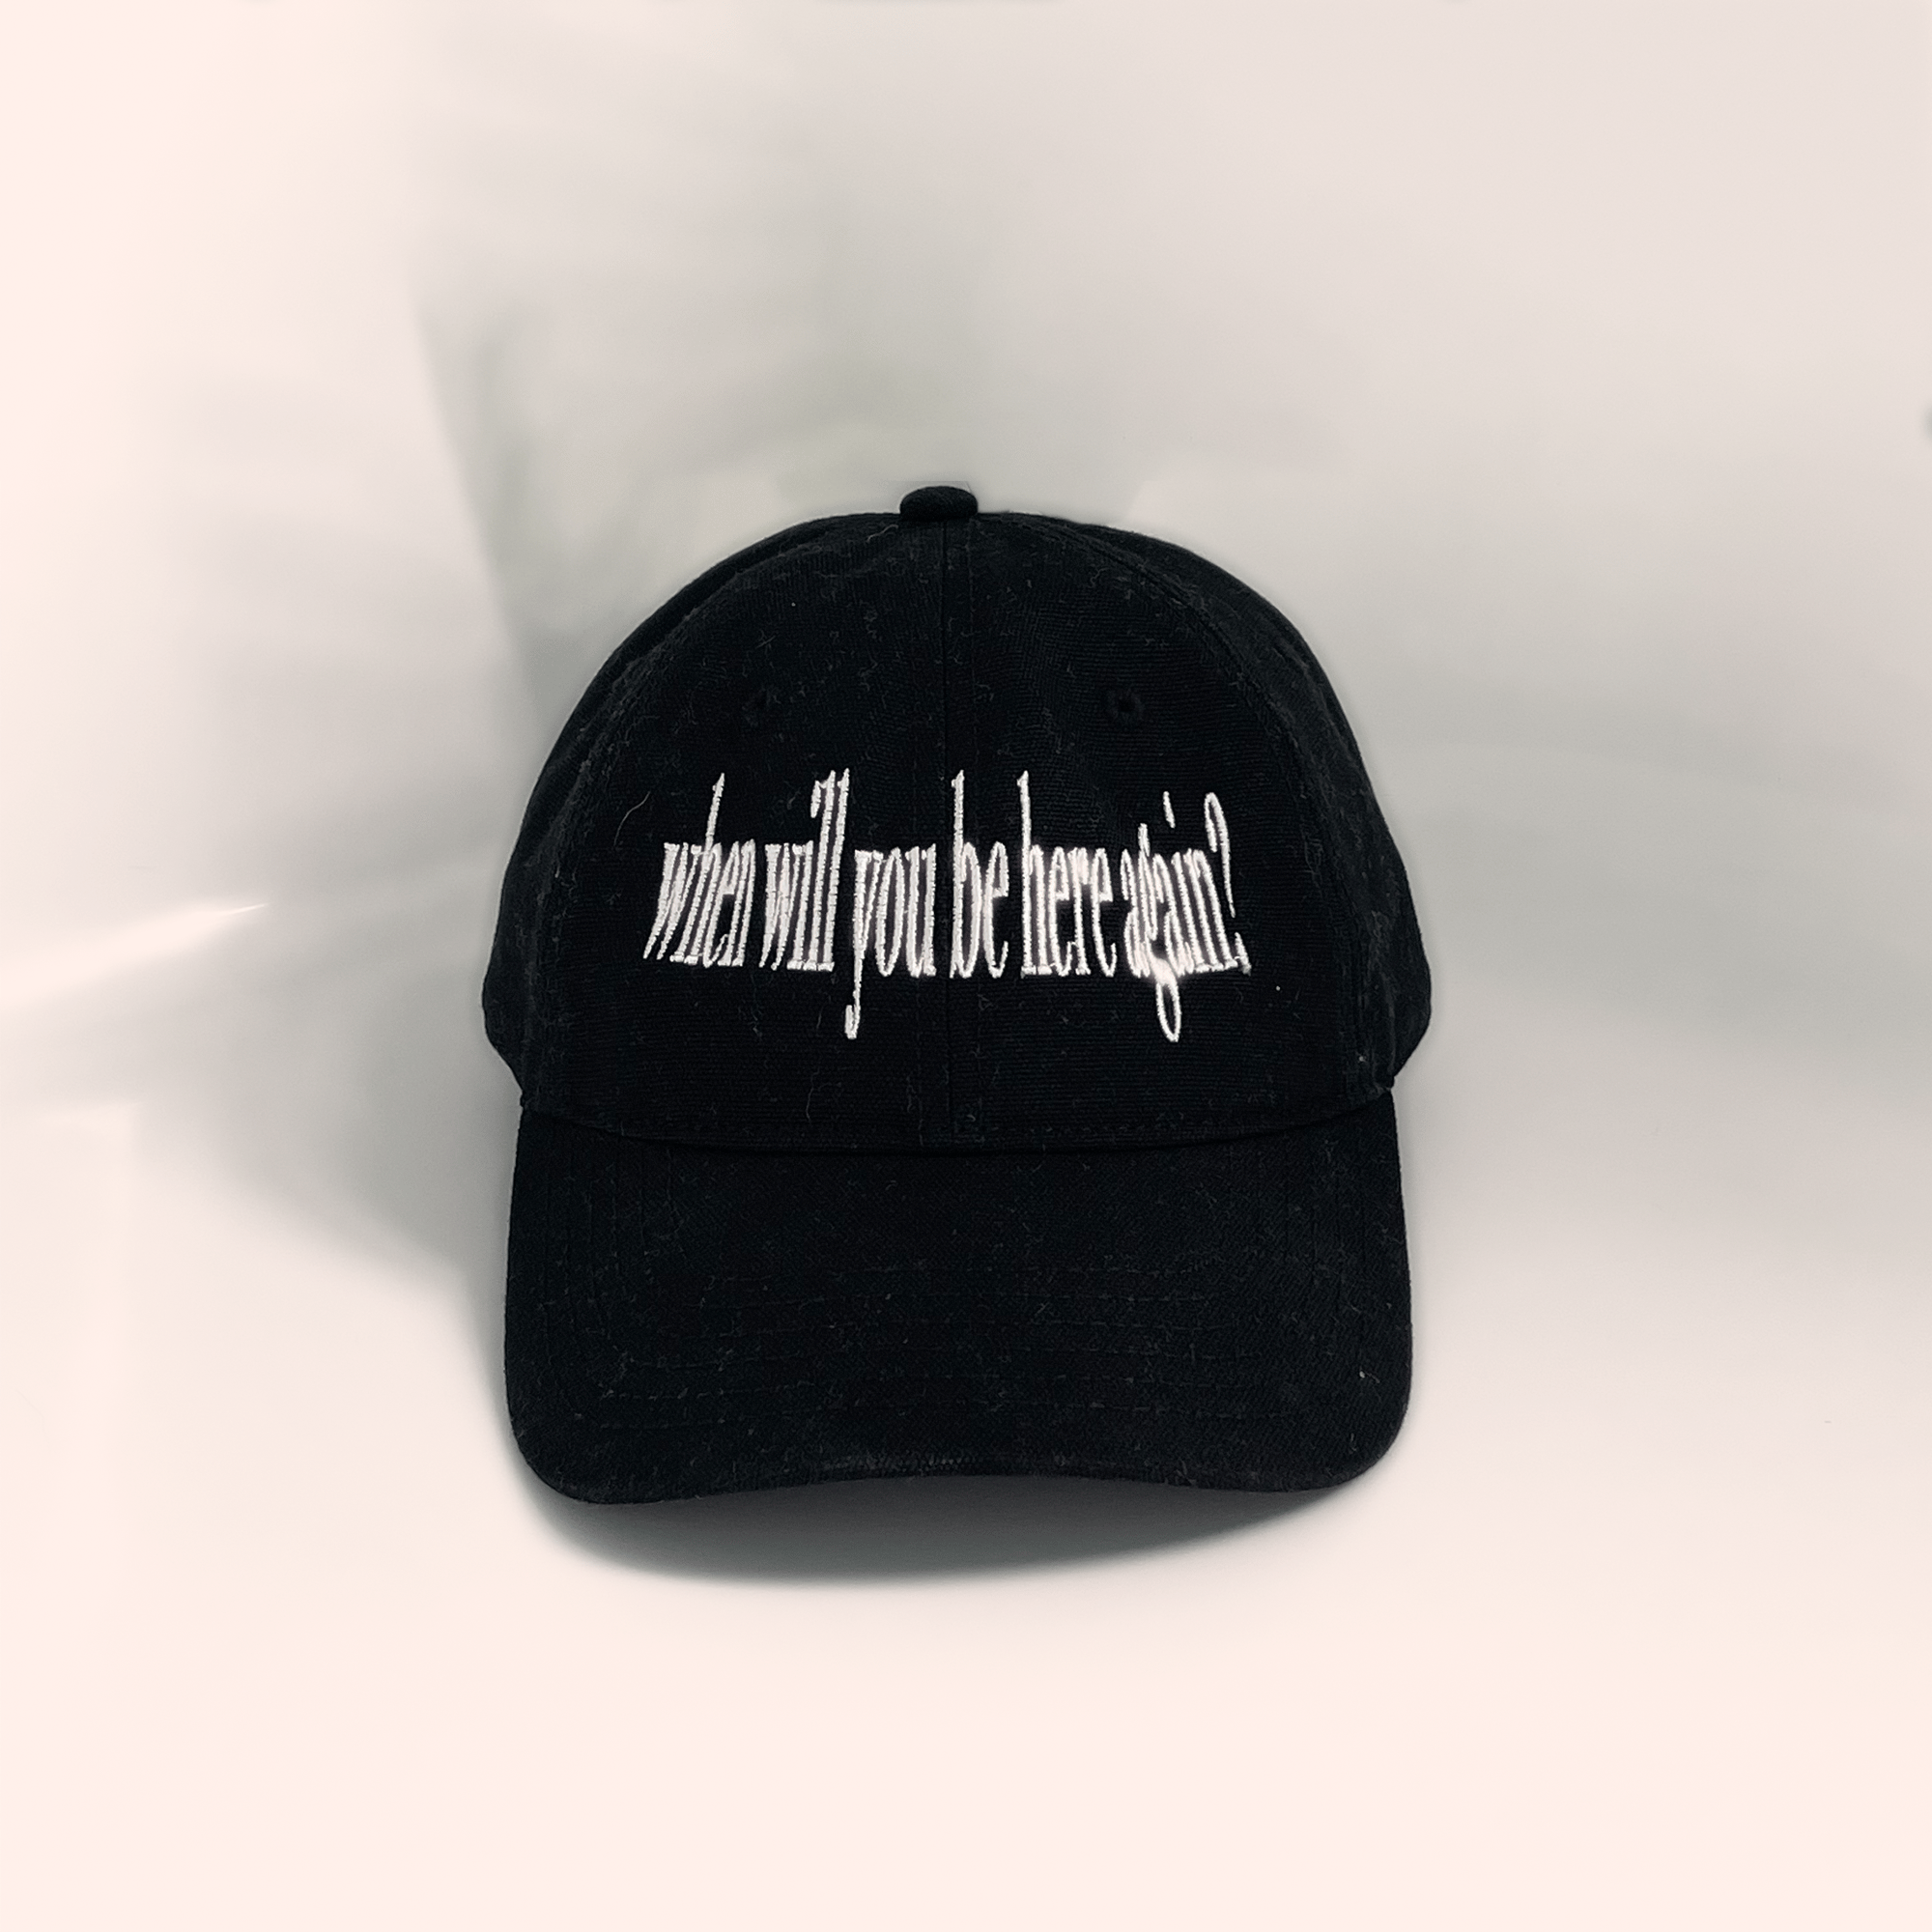 Image of 'When Will You Be Here Again?' Hat